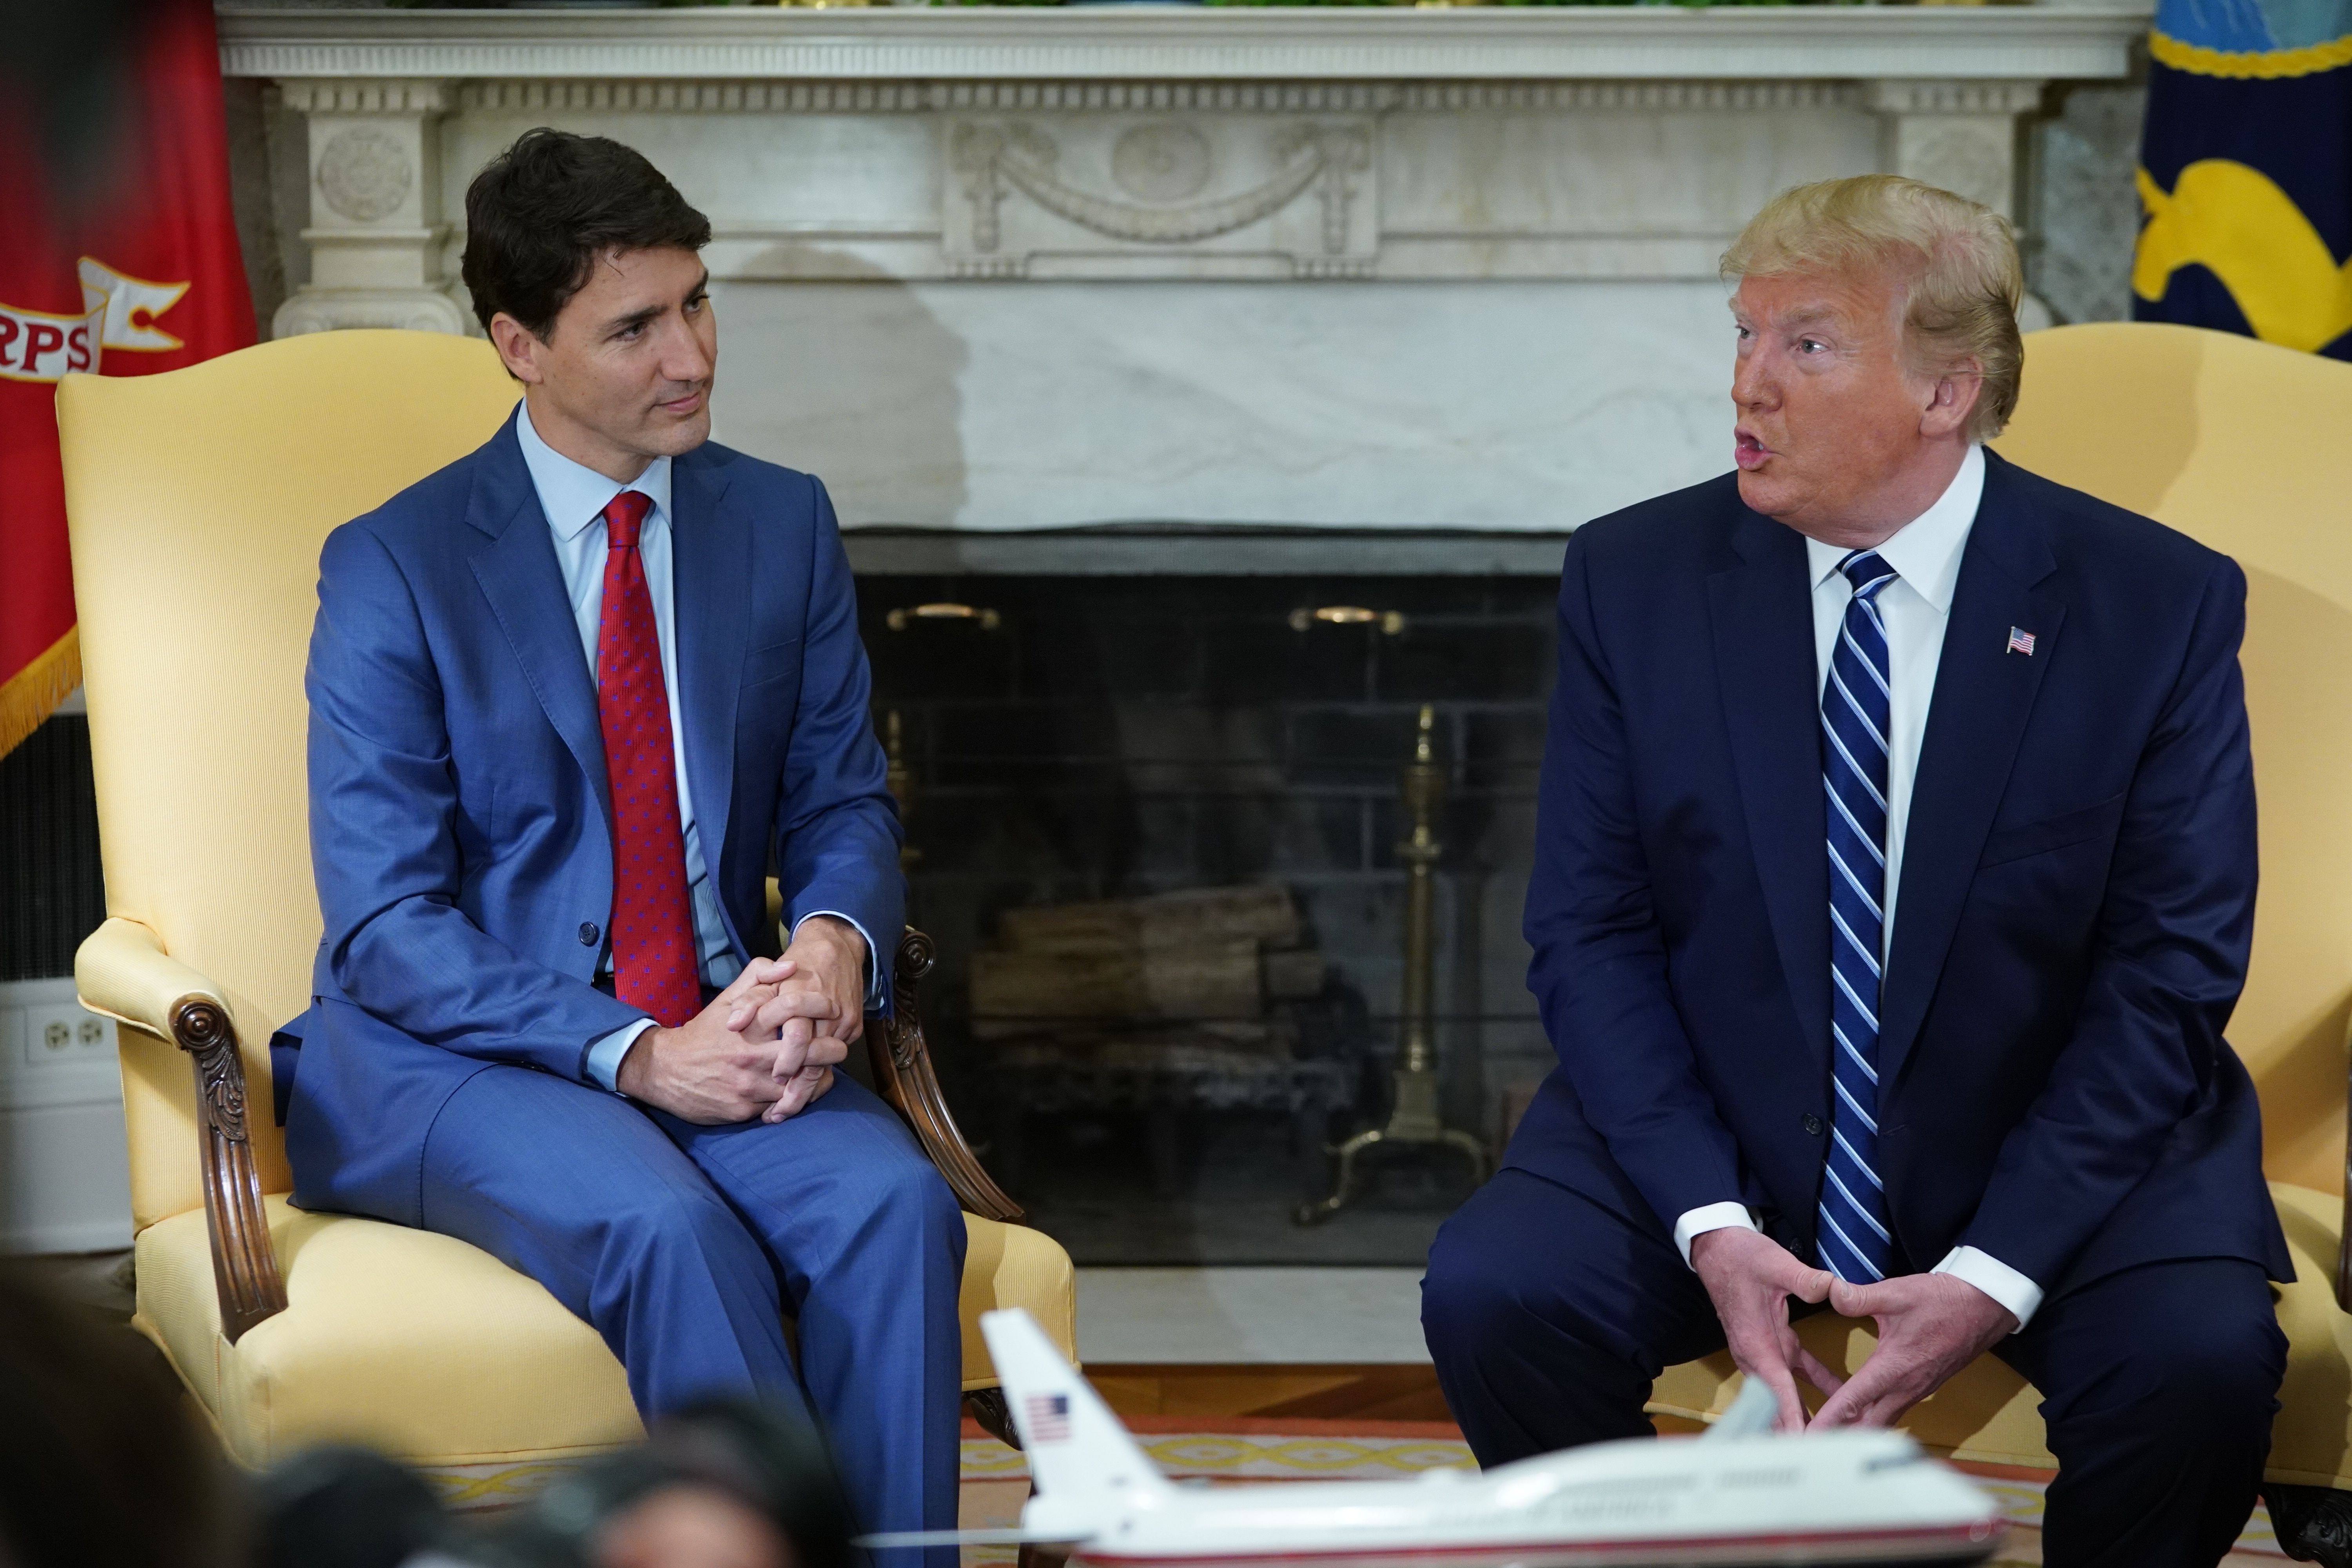 US President Donald Trump and Canadian Prime Minister Justin Trudeau take part in a bilateral meeting in the Oval Office of the White House in Washington, DC, on June 20, 2019. (MANDEL NGAN/AFP/Getty Images)